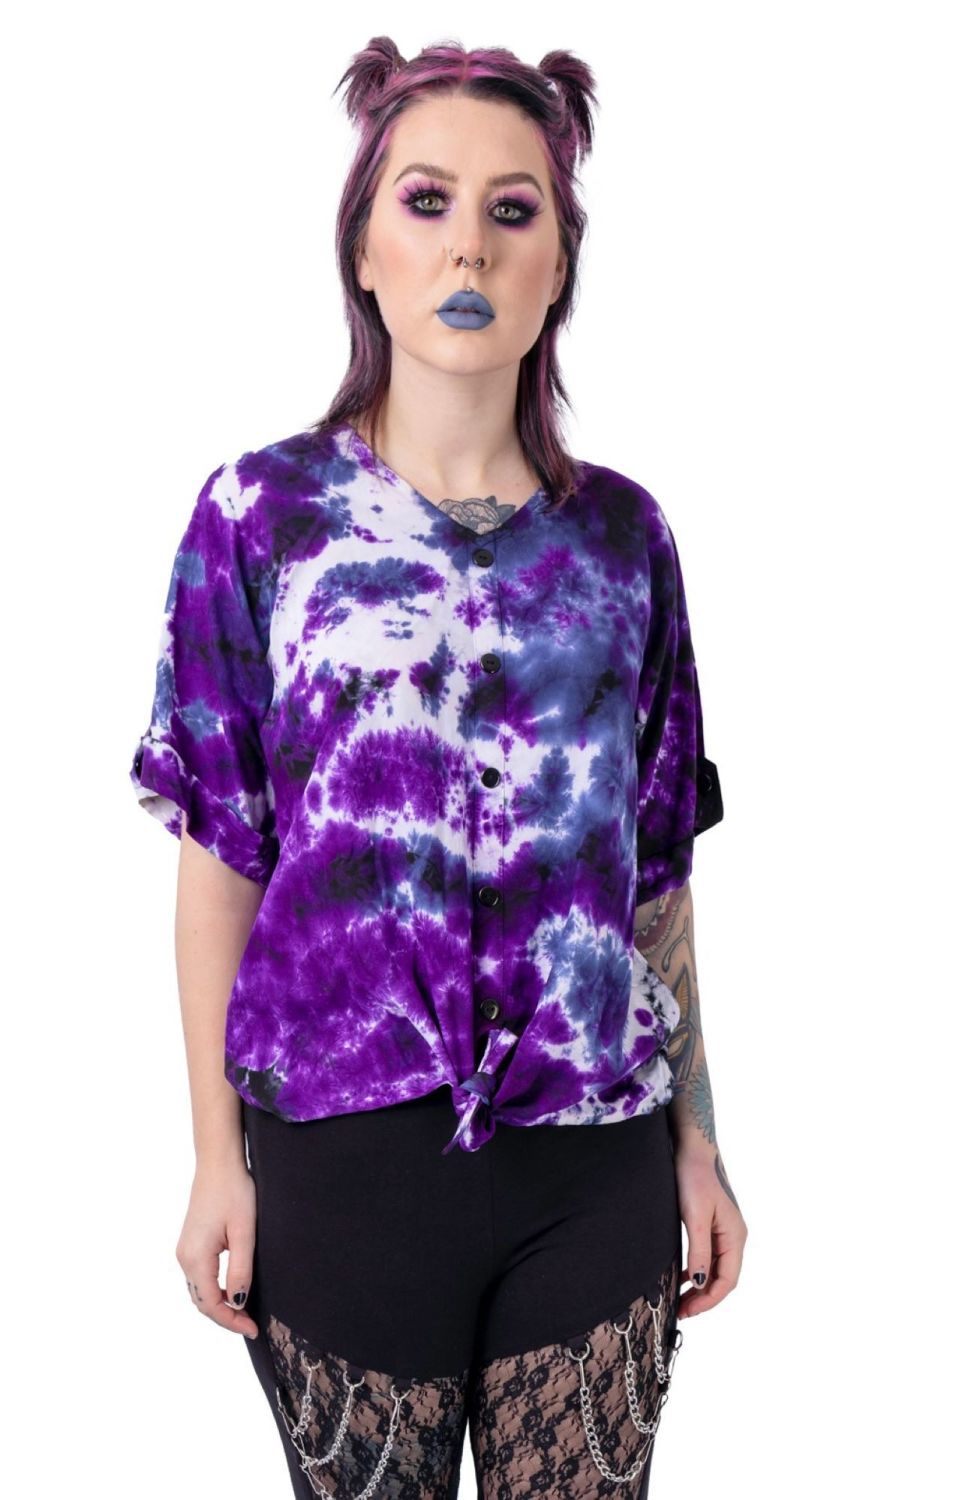 Romilly tie dye top by Innocent lifestyle